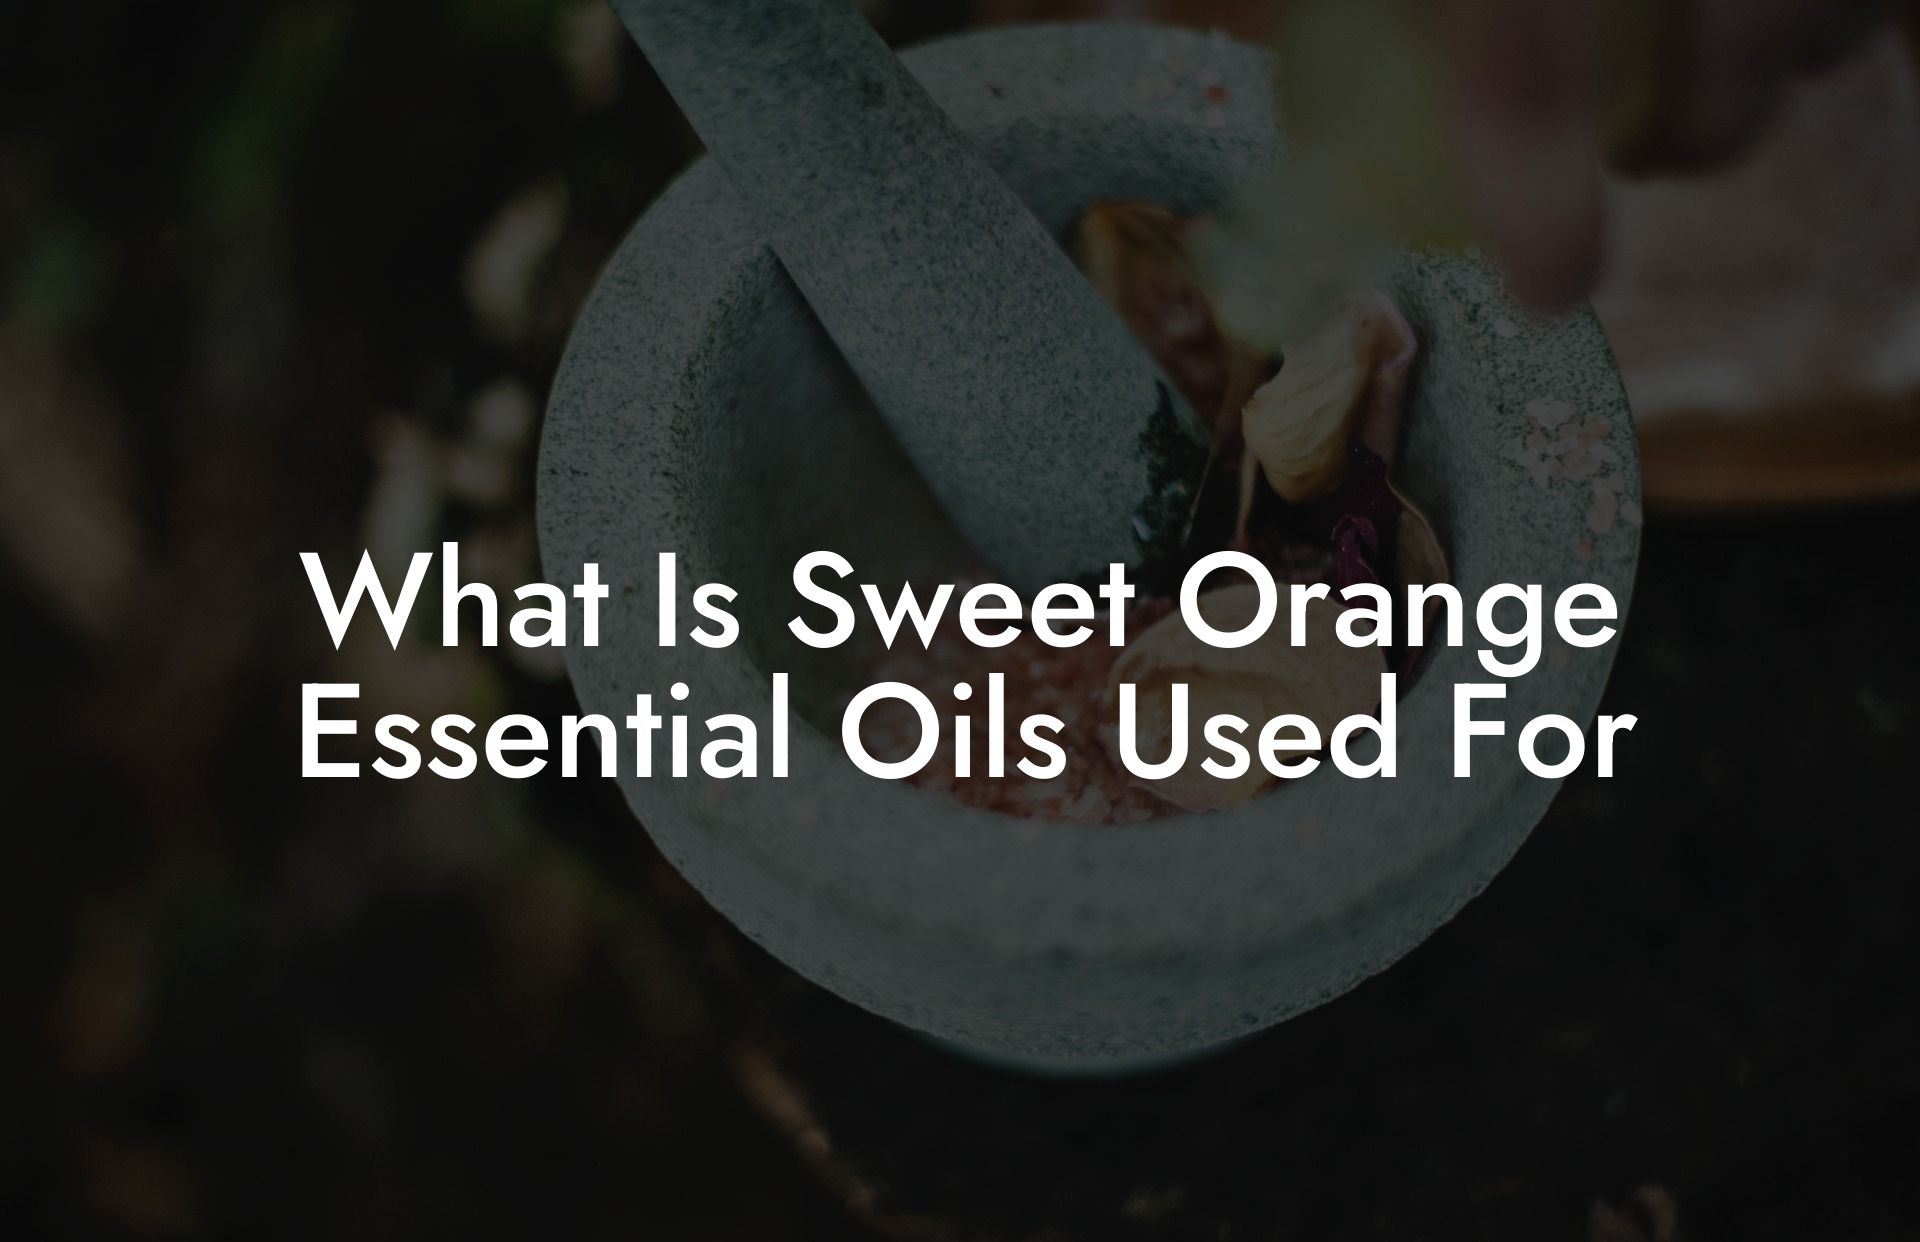 What Is Sweet Orange Essential Oils Used For